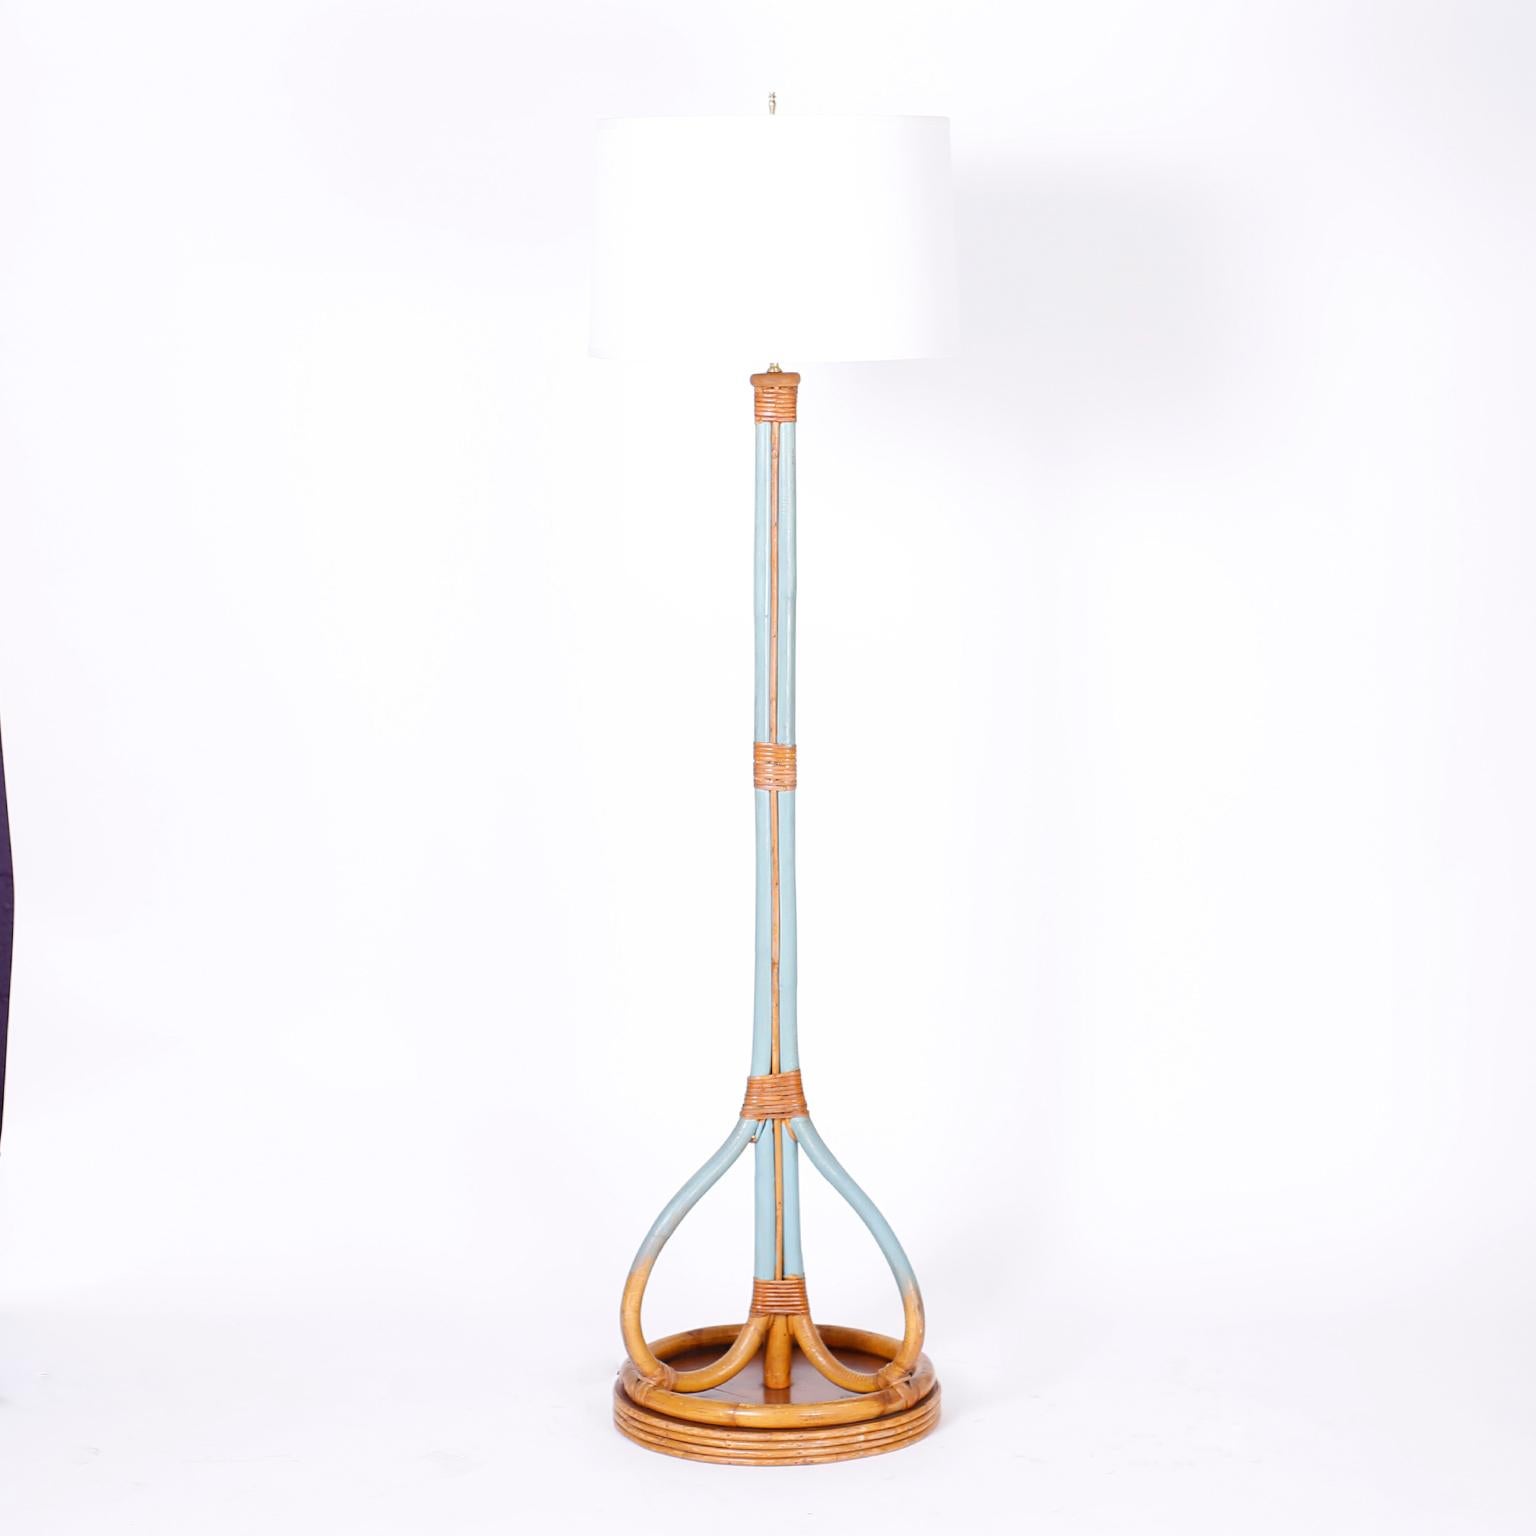 Stand out pair of midcentury floor lamps with surprising yet welcome blue paint, crafted in bamboo and bent bamboo with wrapped rattan over a base with bamboo rings around a mahogany disk.